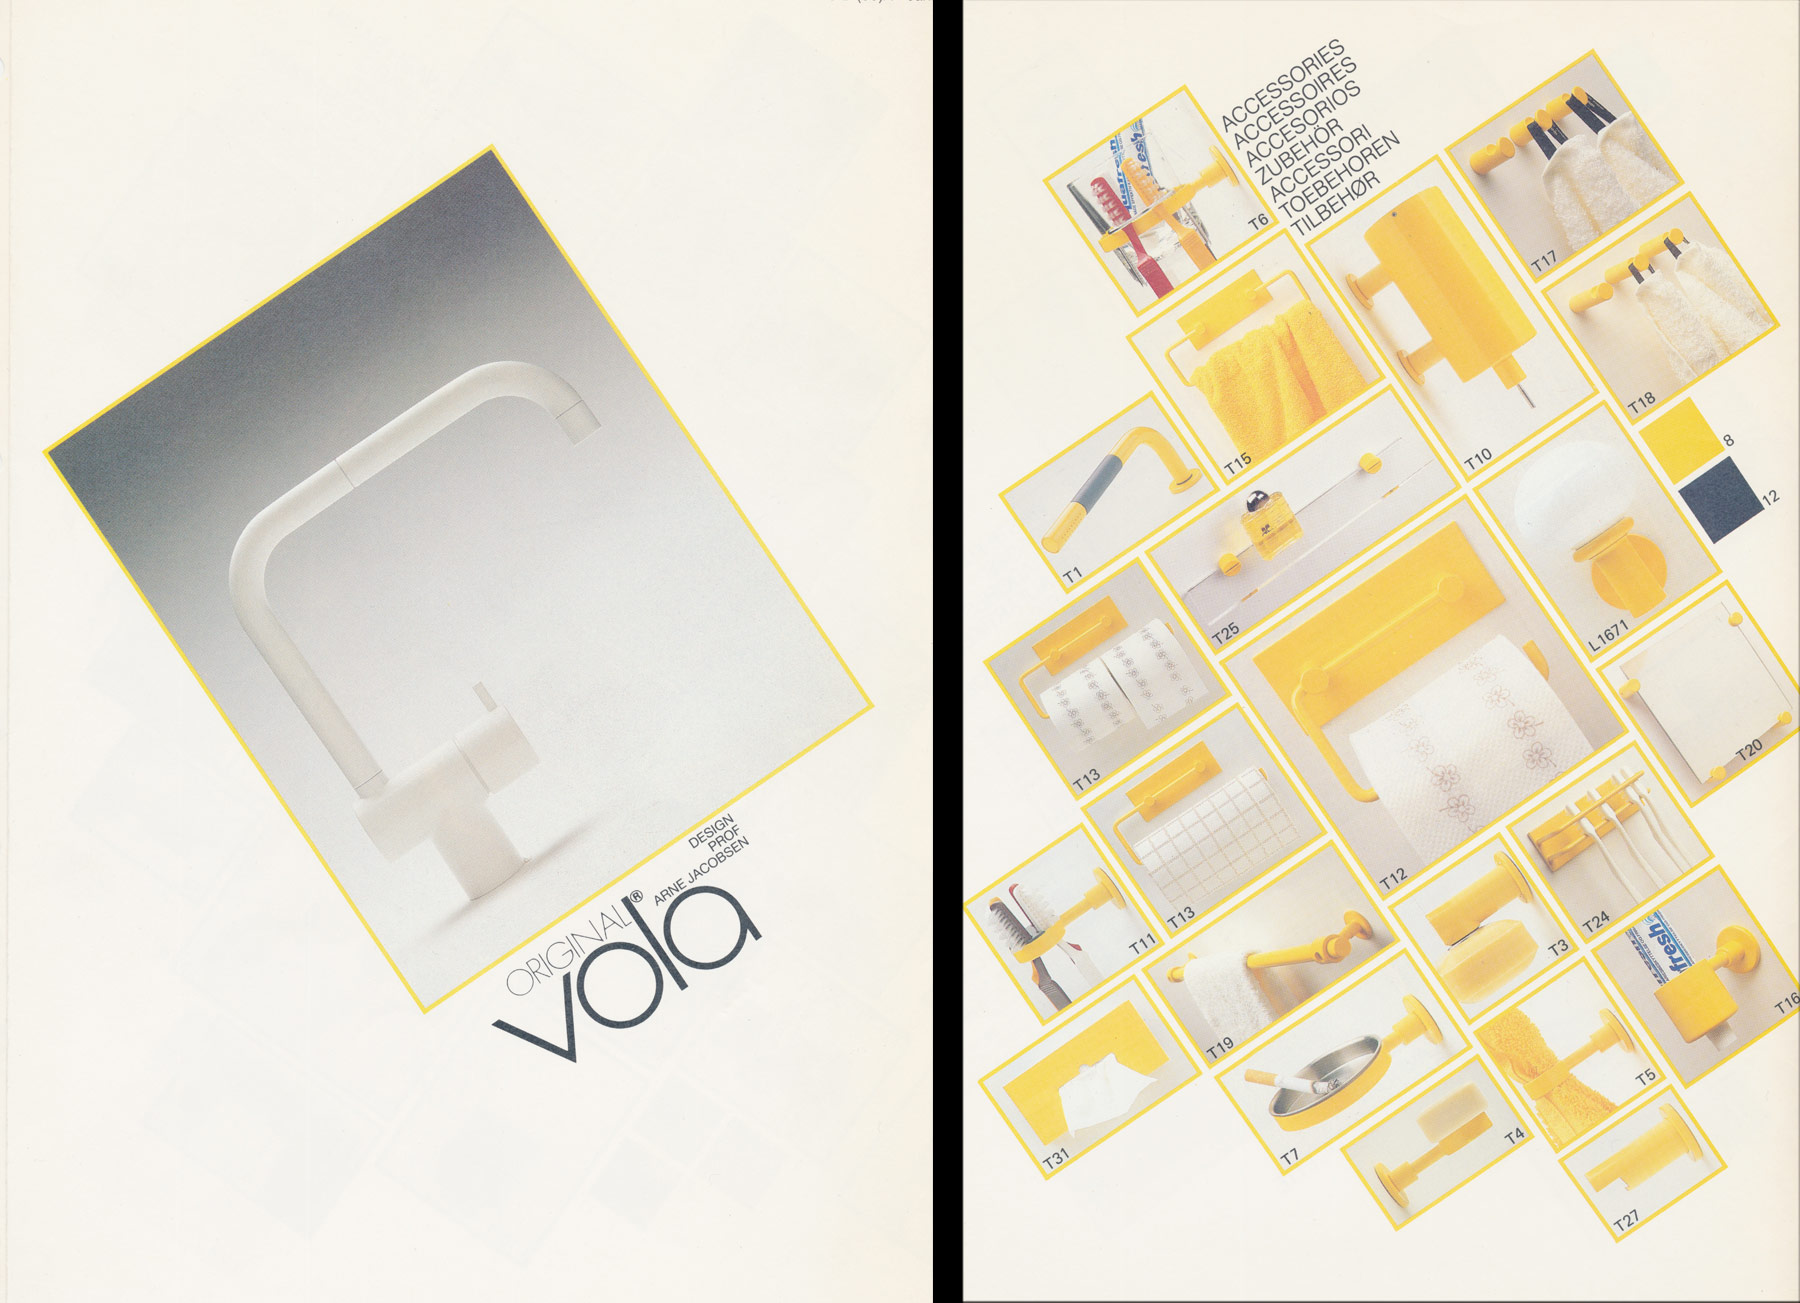 Brochure cover + accessories product range in yellow